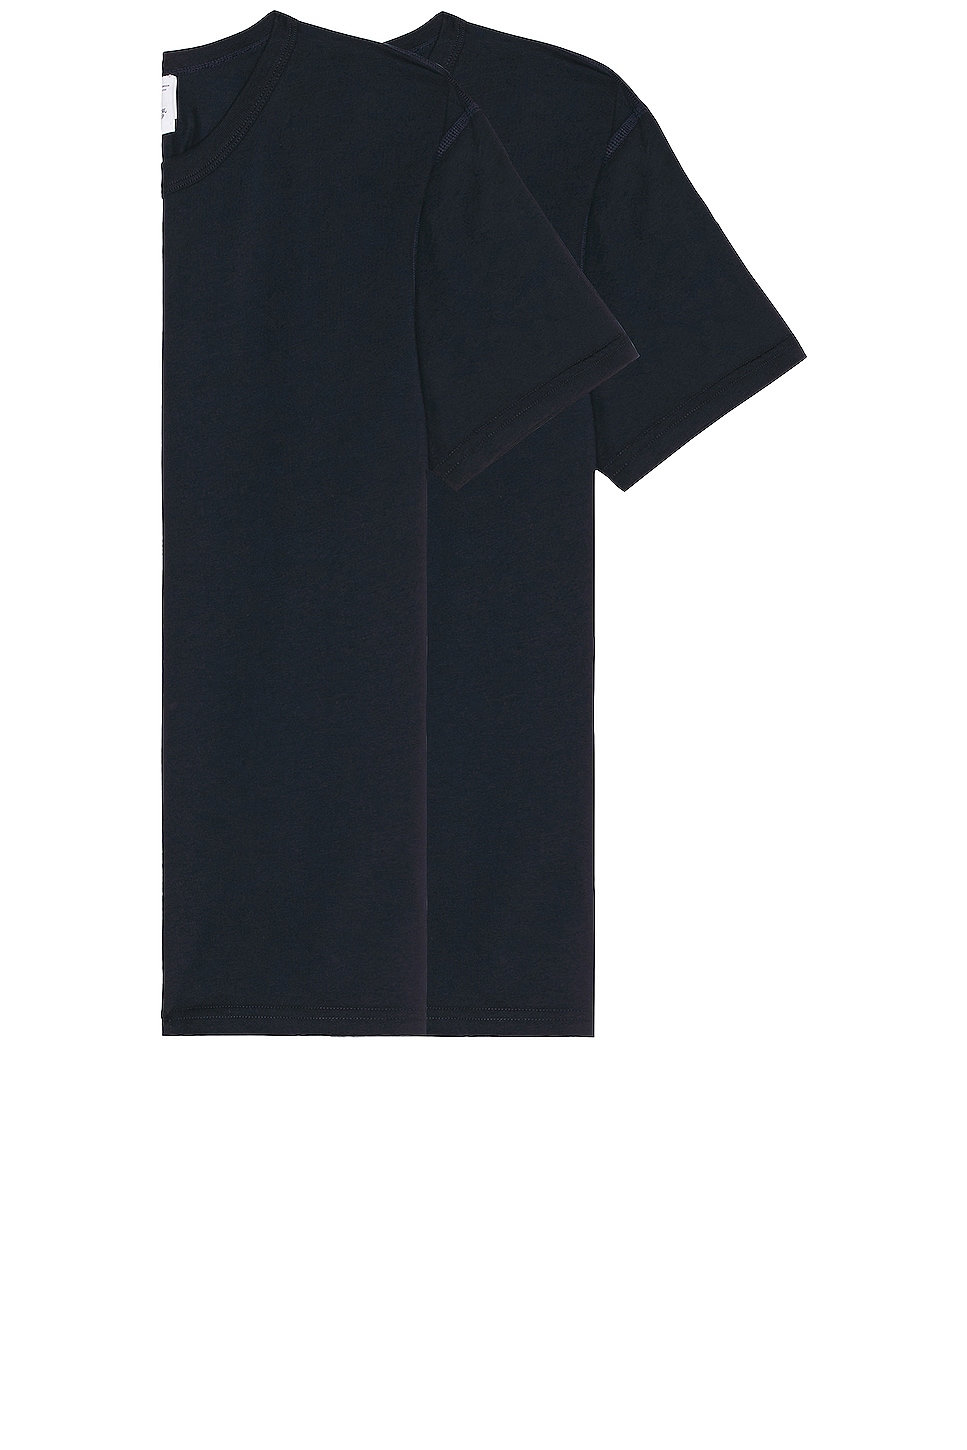 Image 1 of Reigning Champ 2-pack Lightweight Jersey T-shirt in Navy